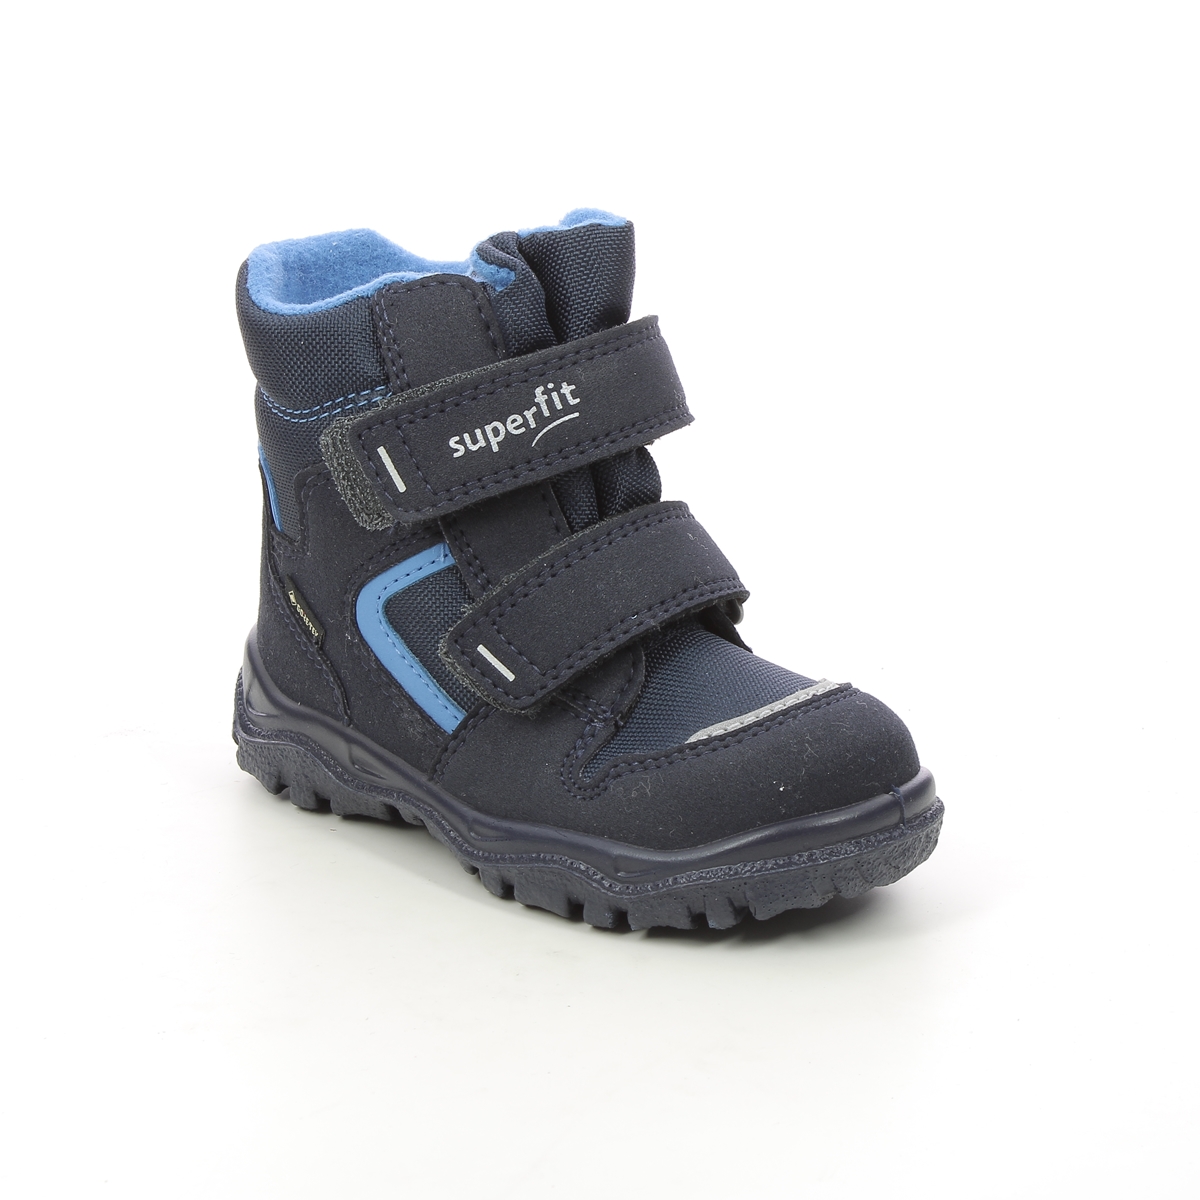 Superfit Husky Inf Gtx Navy Kids Toddler Boys Boots 1000047-8000 In Size 29 In Plain Navy